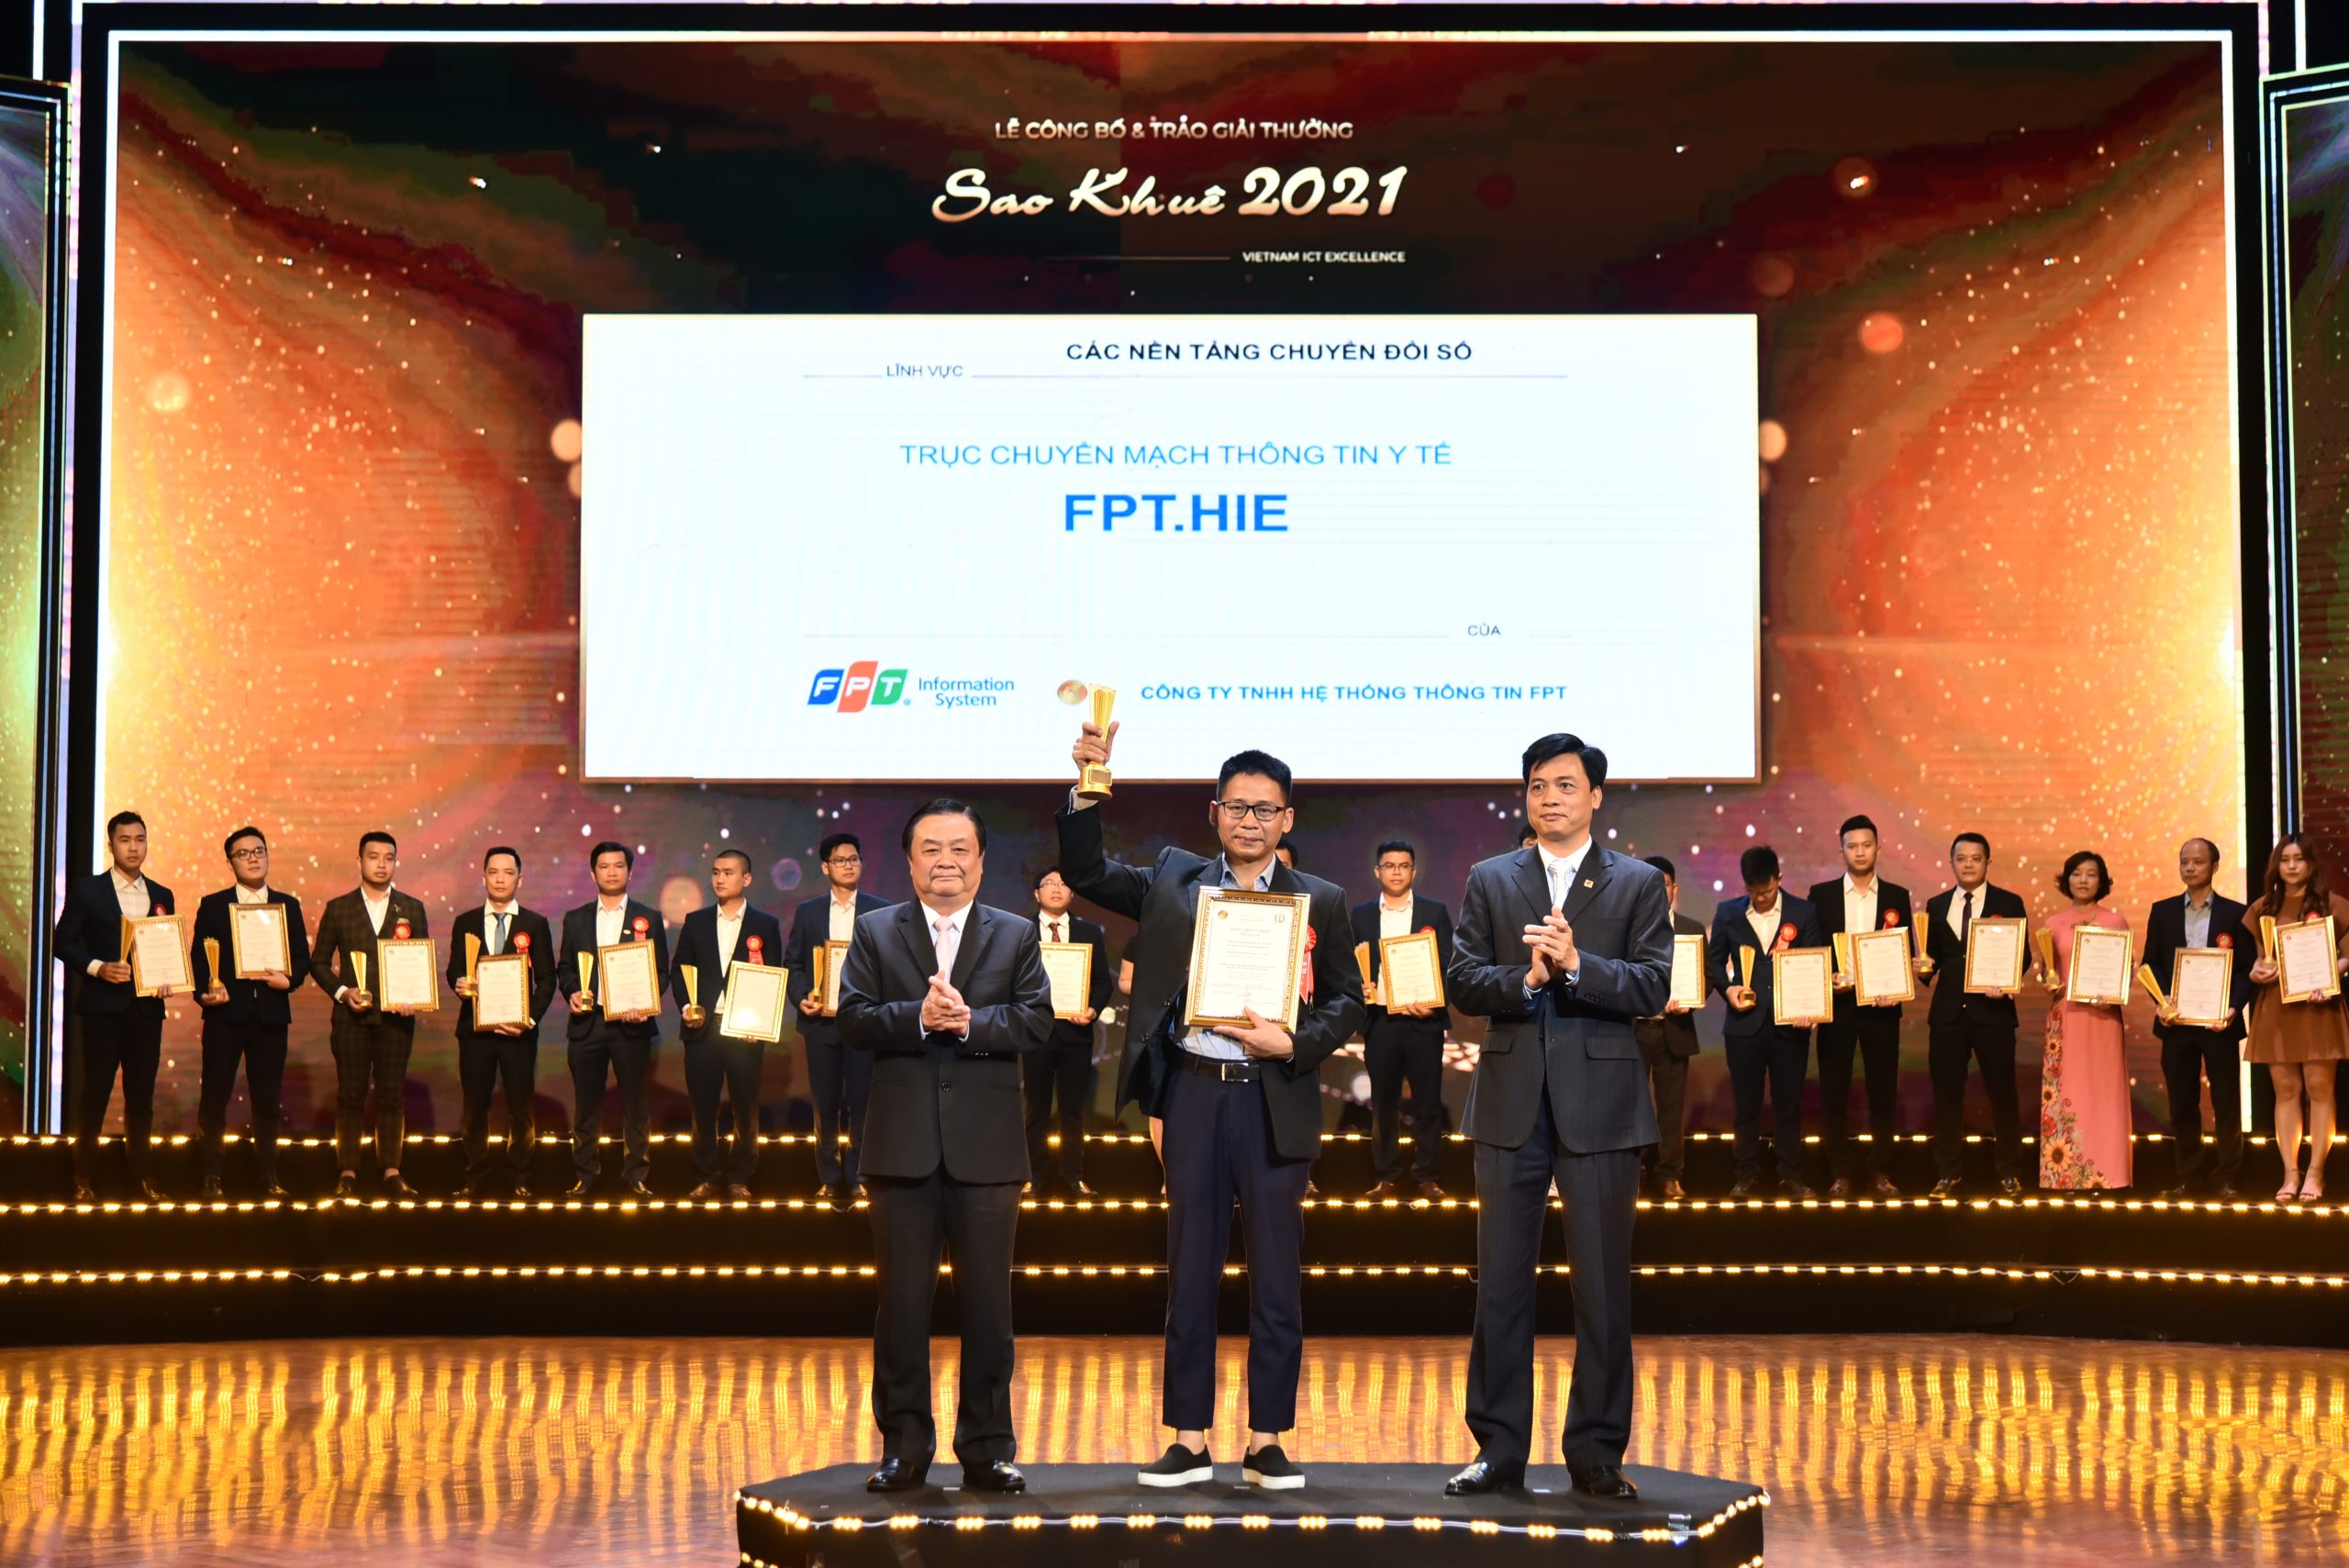 2021 Sao Khue Awards (Vietnam ICT Excellence) – Health Information Exchange System (FPT.HIE)